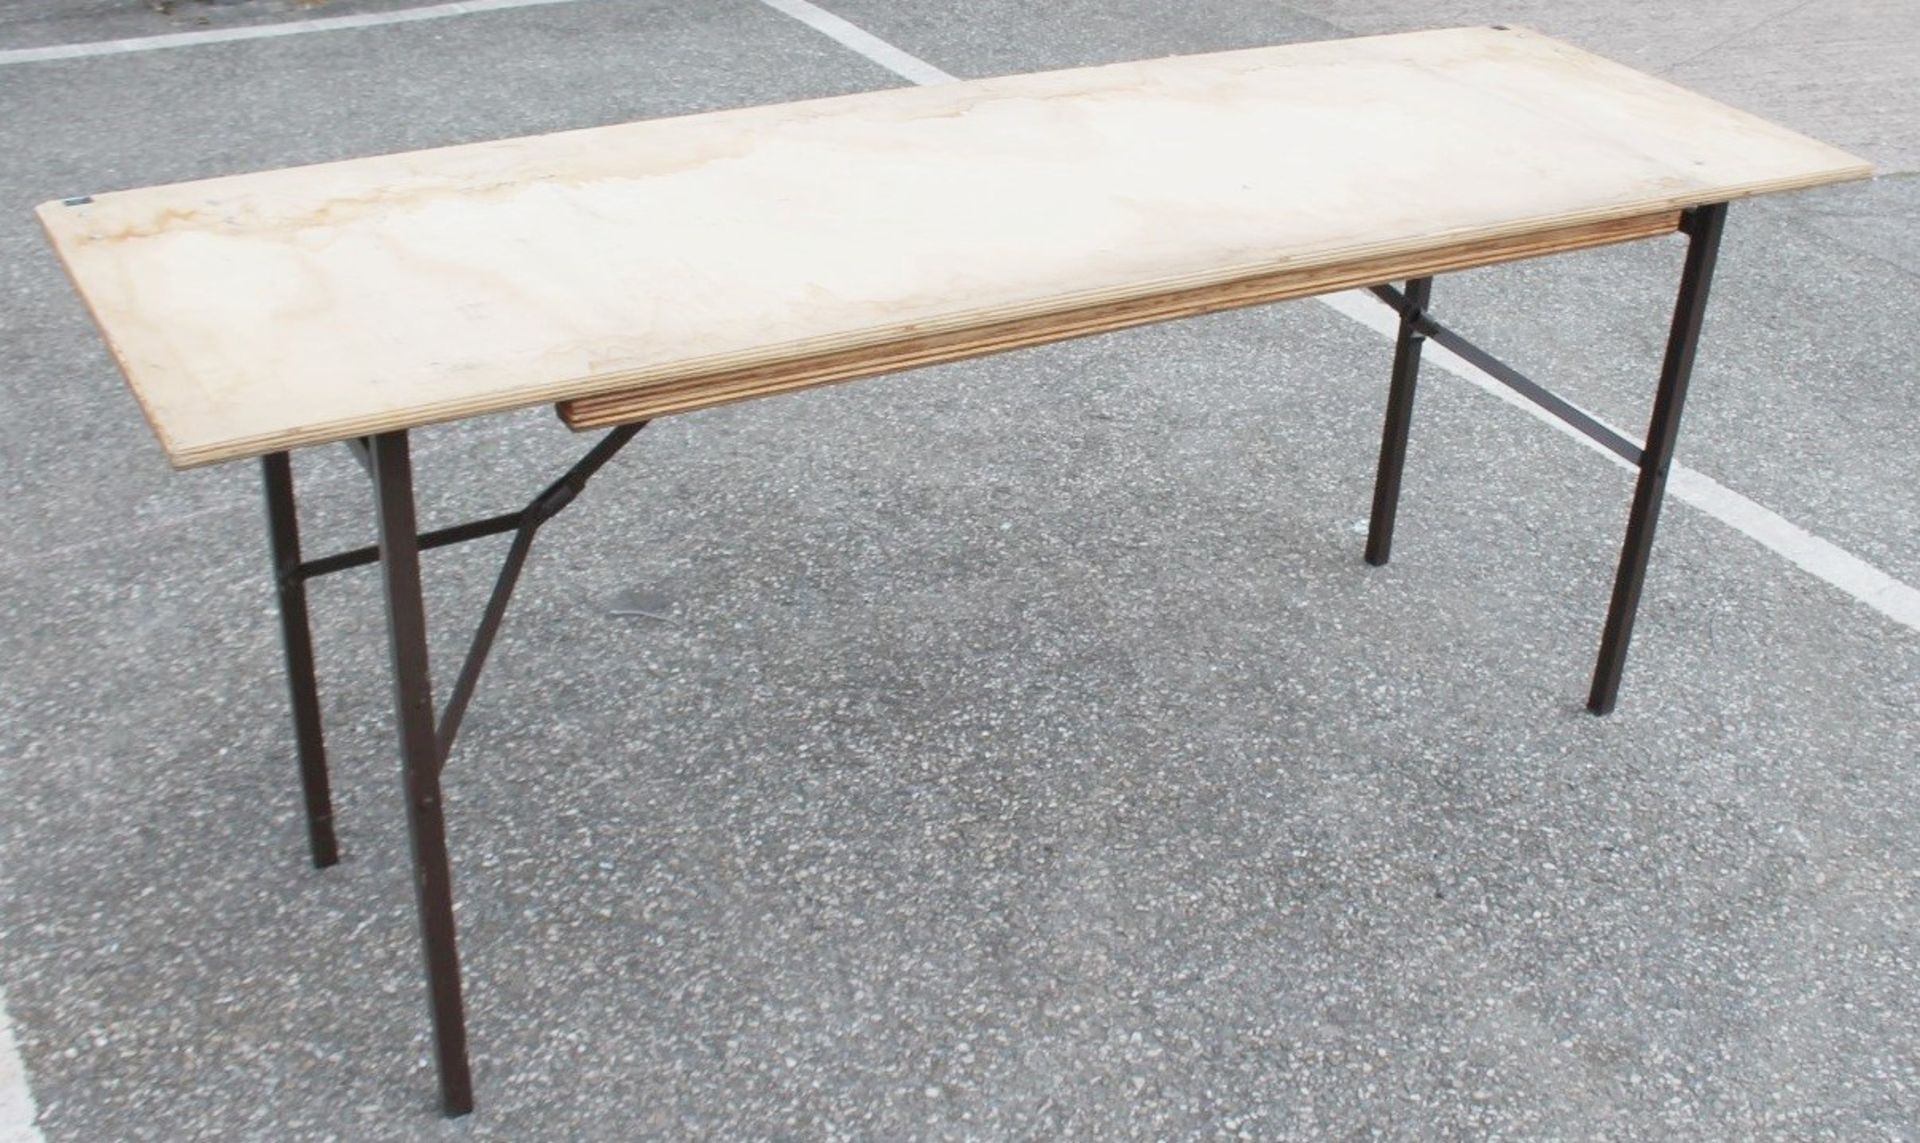 10 x Folding 6ft Wooden Topped Rectangular Trestle Tables - Recently Removed From A Well-known